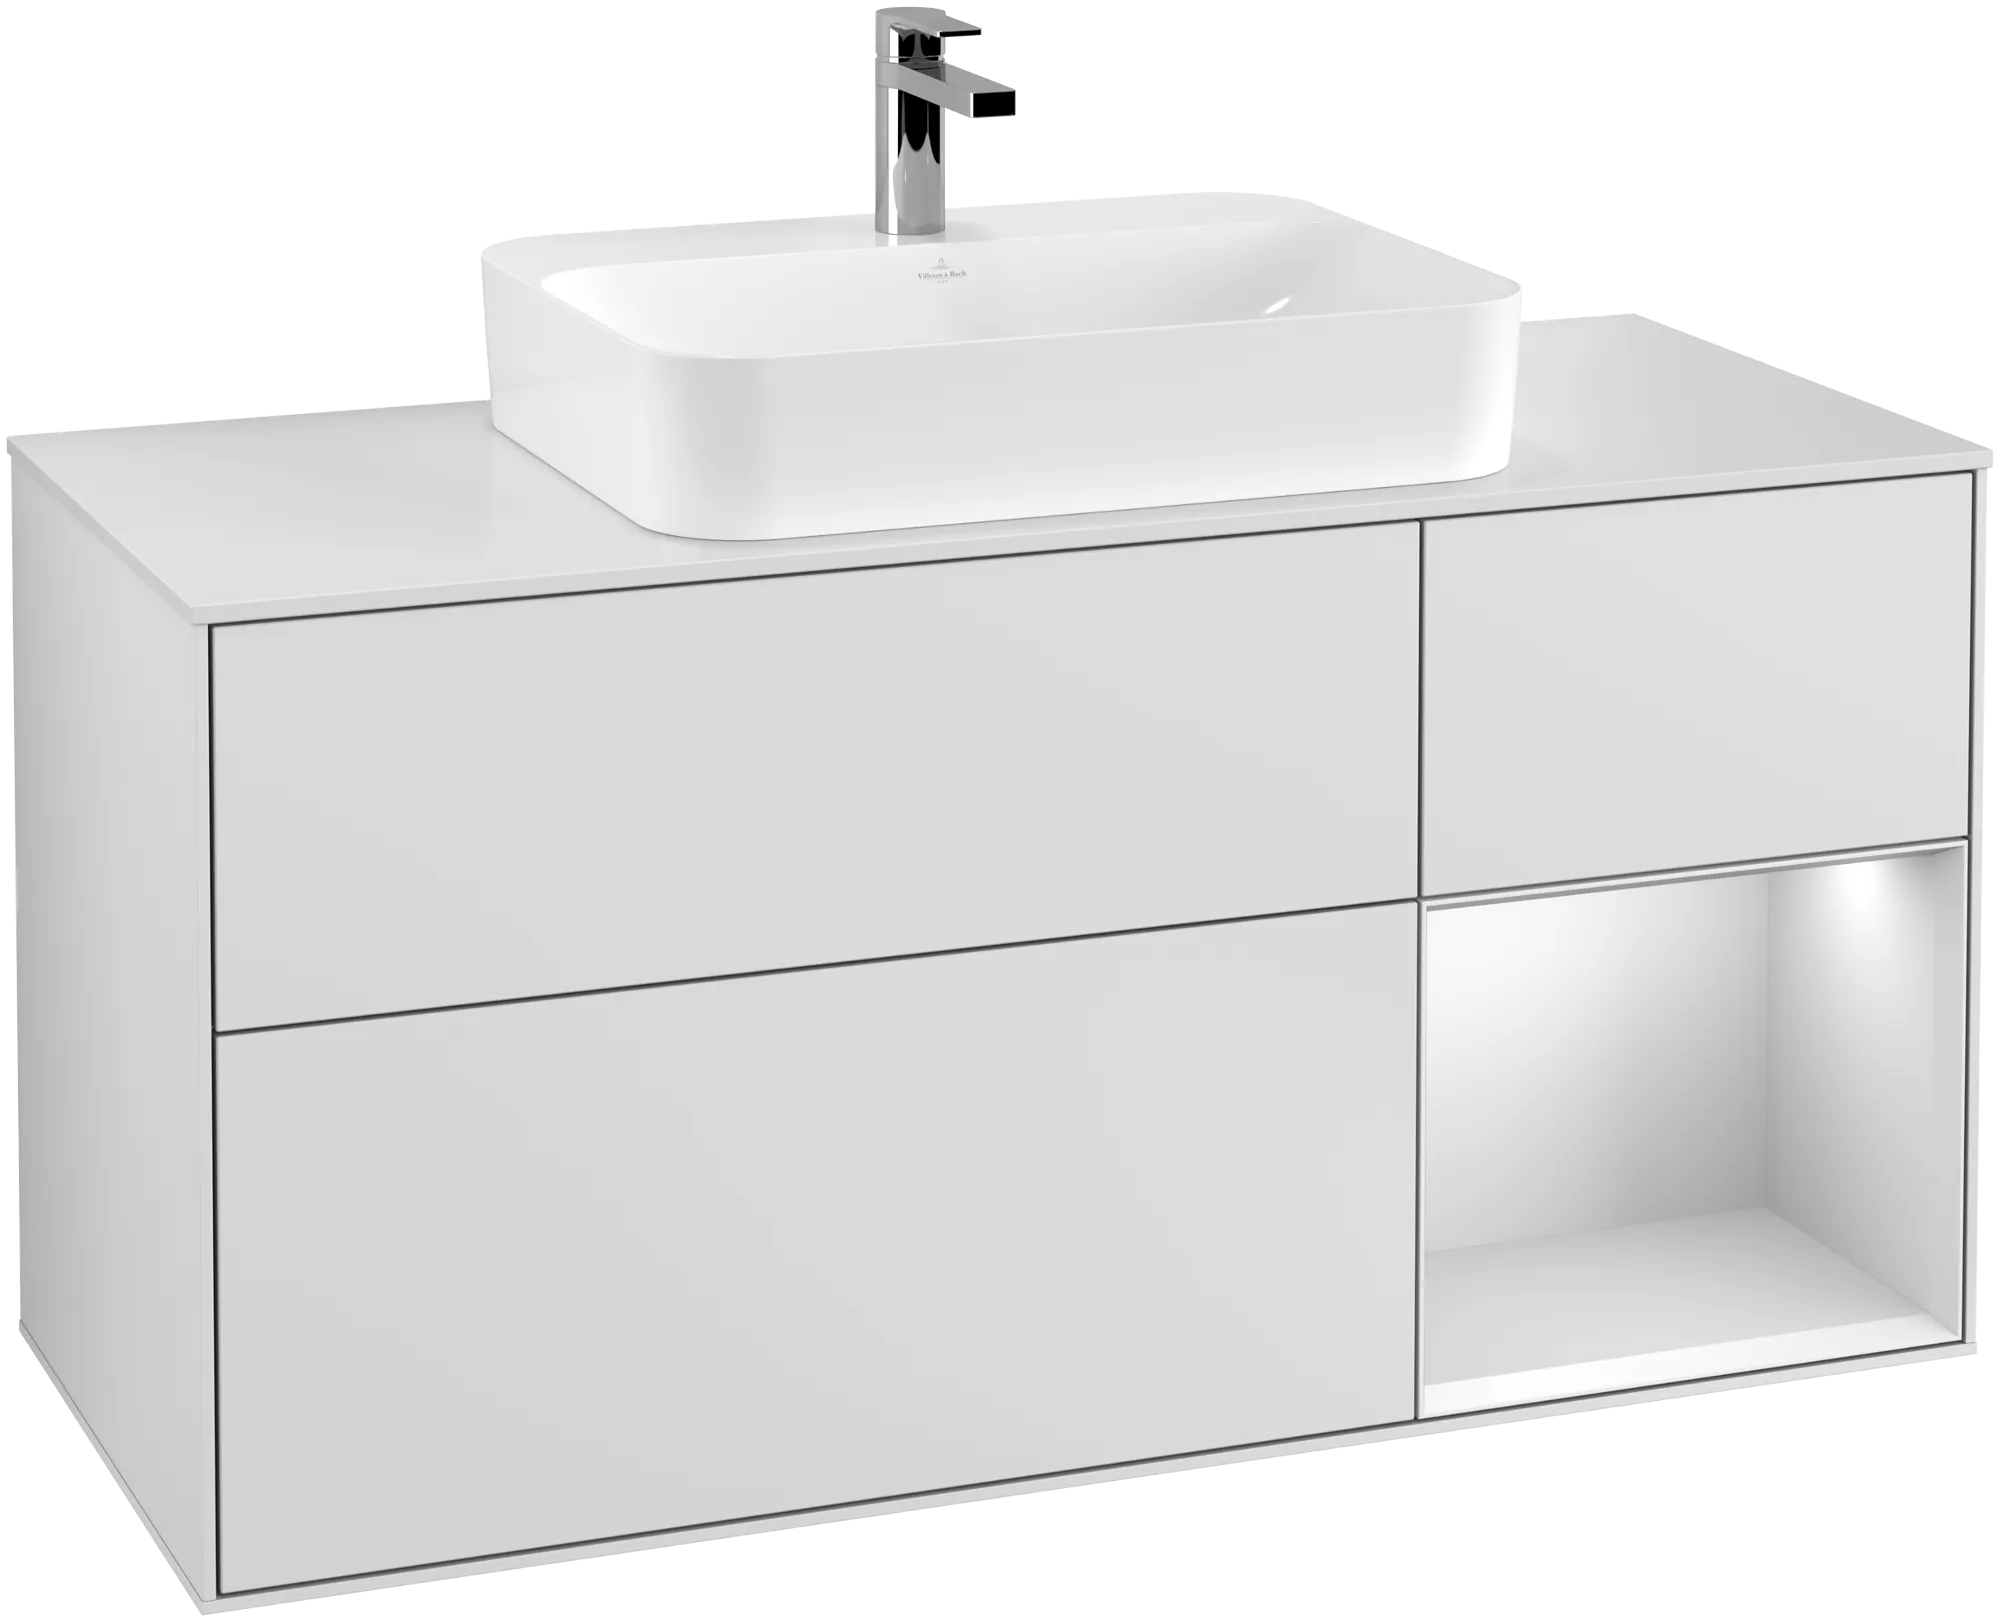 VILLEROY BOCH Finion Vanity unit, with lighting, 3 pull-out compartments, 1200 x 603 x 501 mm, White Matt Lacquer / White Matt Lacquer / Glass White Matt #G421MTMT resmi